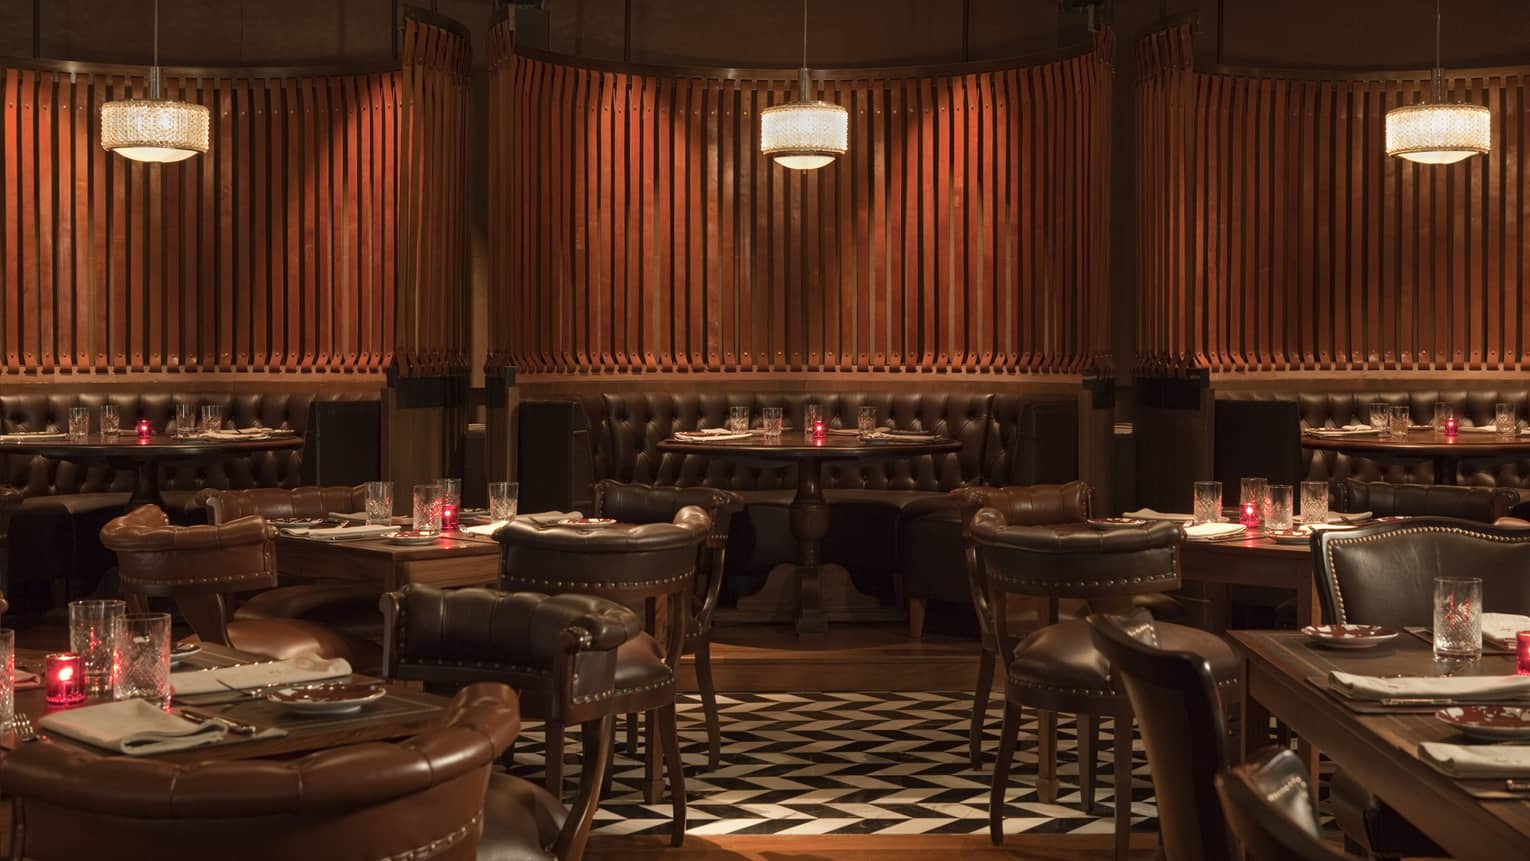 Dimly lit lounge with tufted dark brown leather booths, tables with wood-and-leather chairs, a black-and-white parquet floor and small red candles on every table